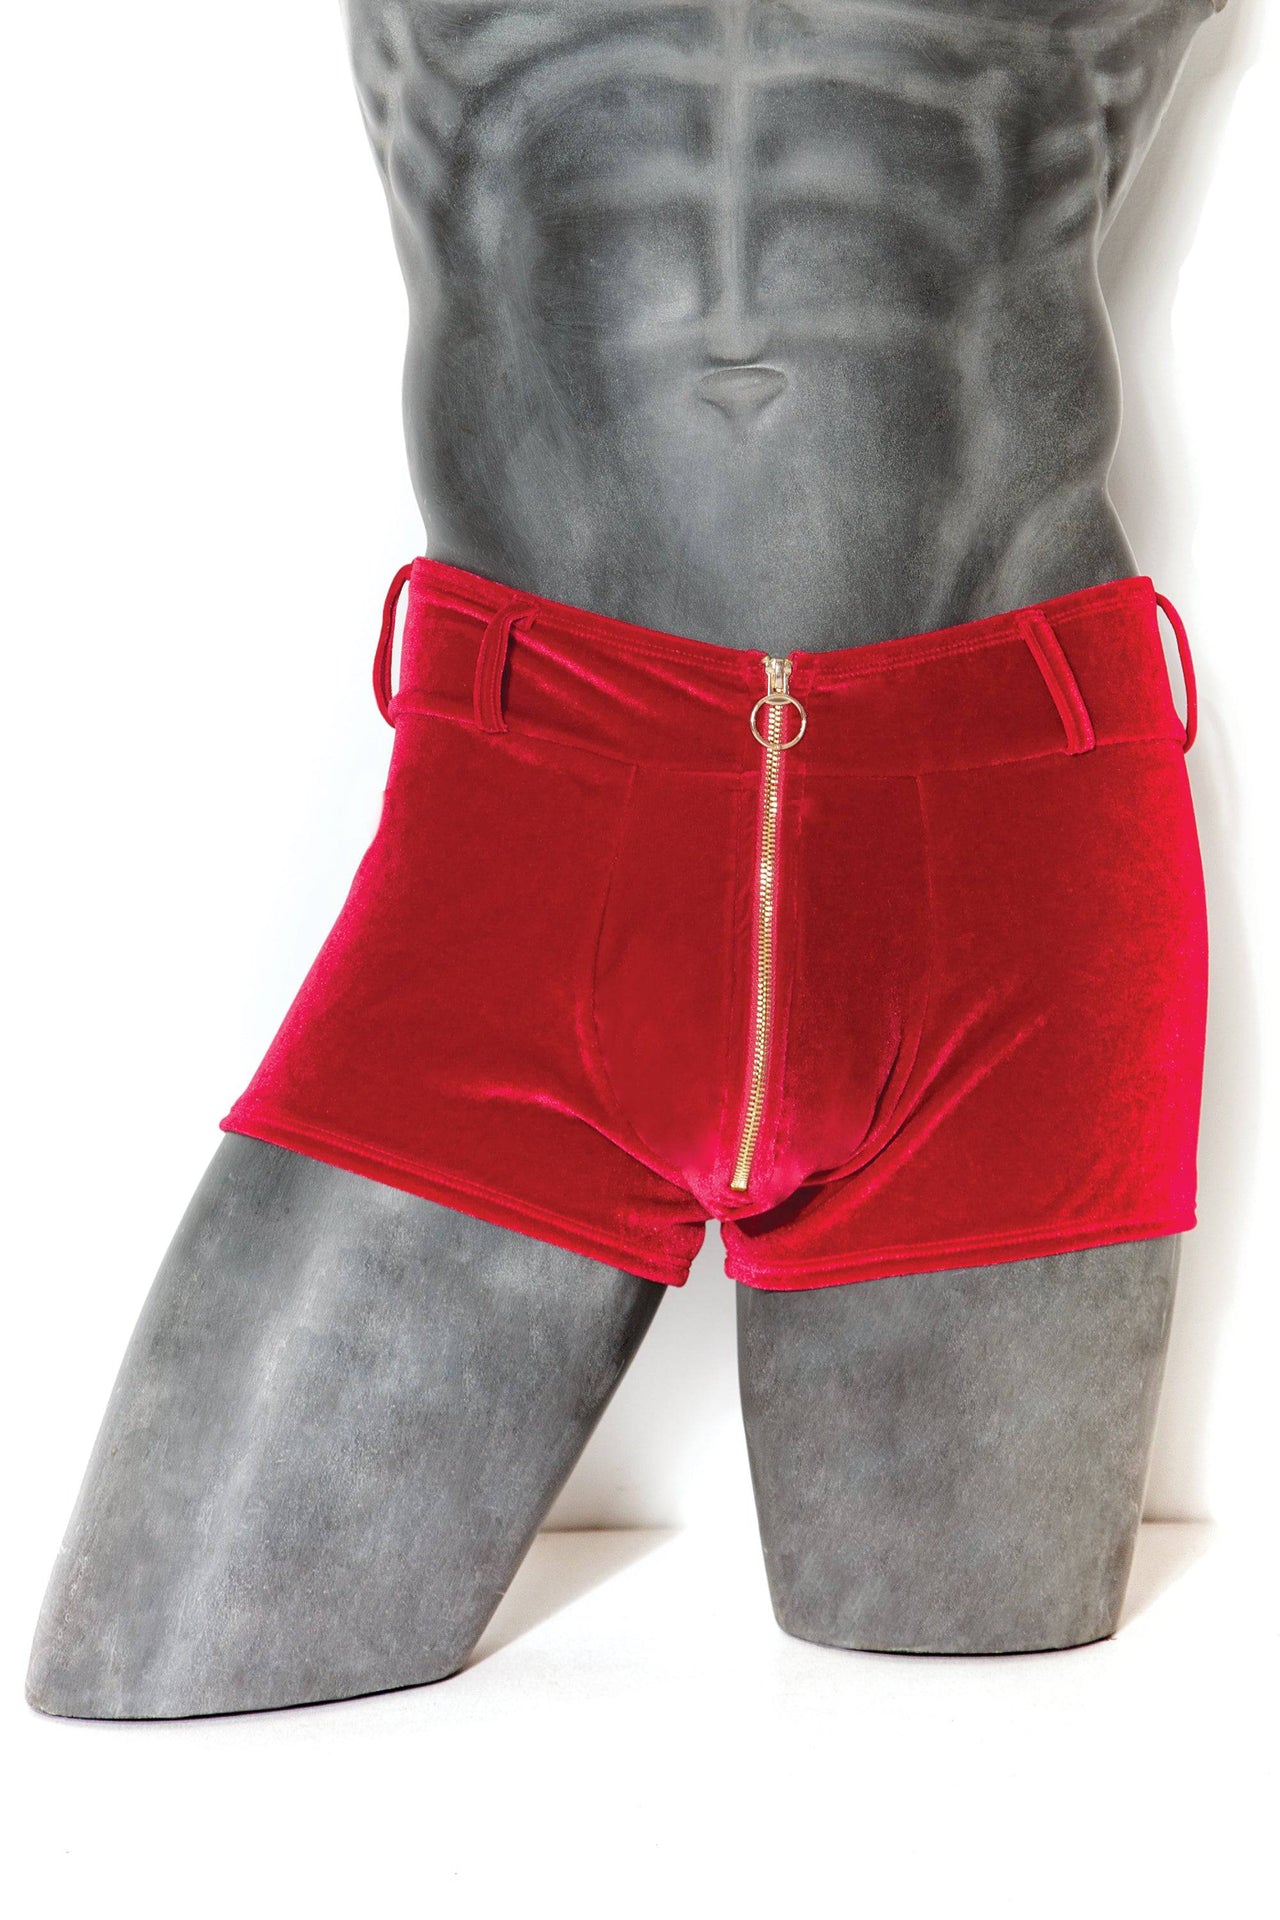 Coquette - 21326 - Boxer Shorts - Red - Stag Shop